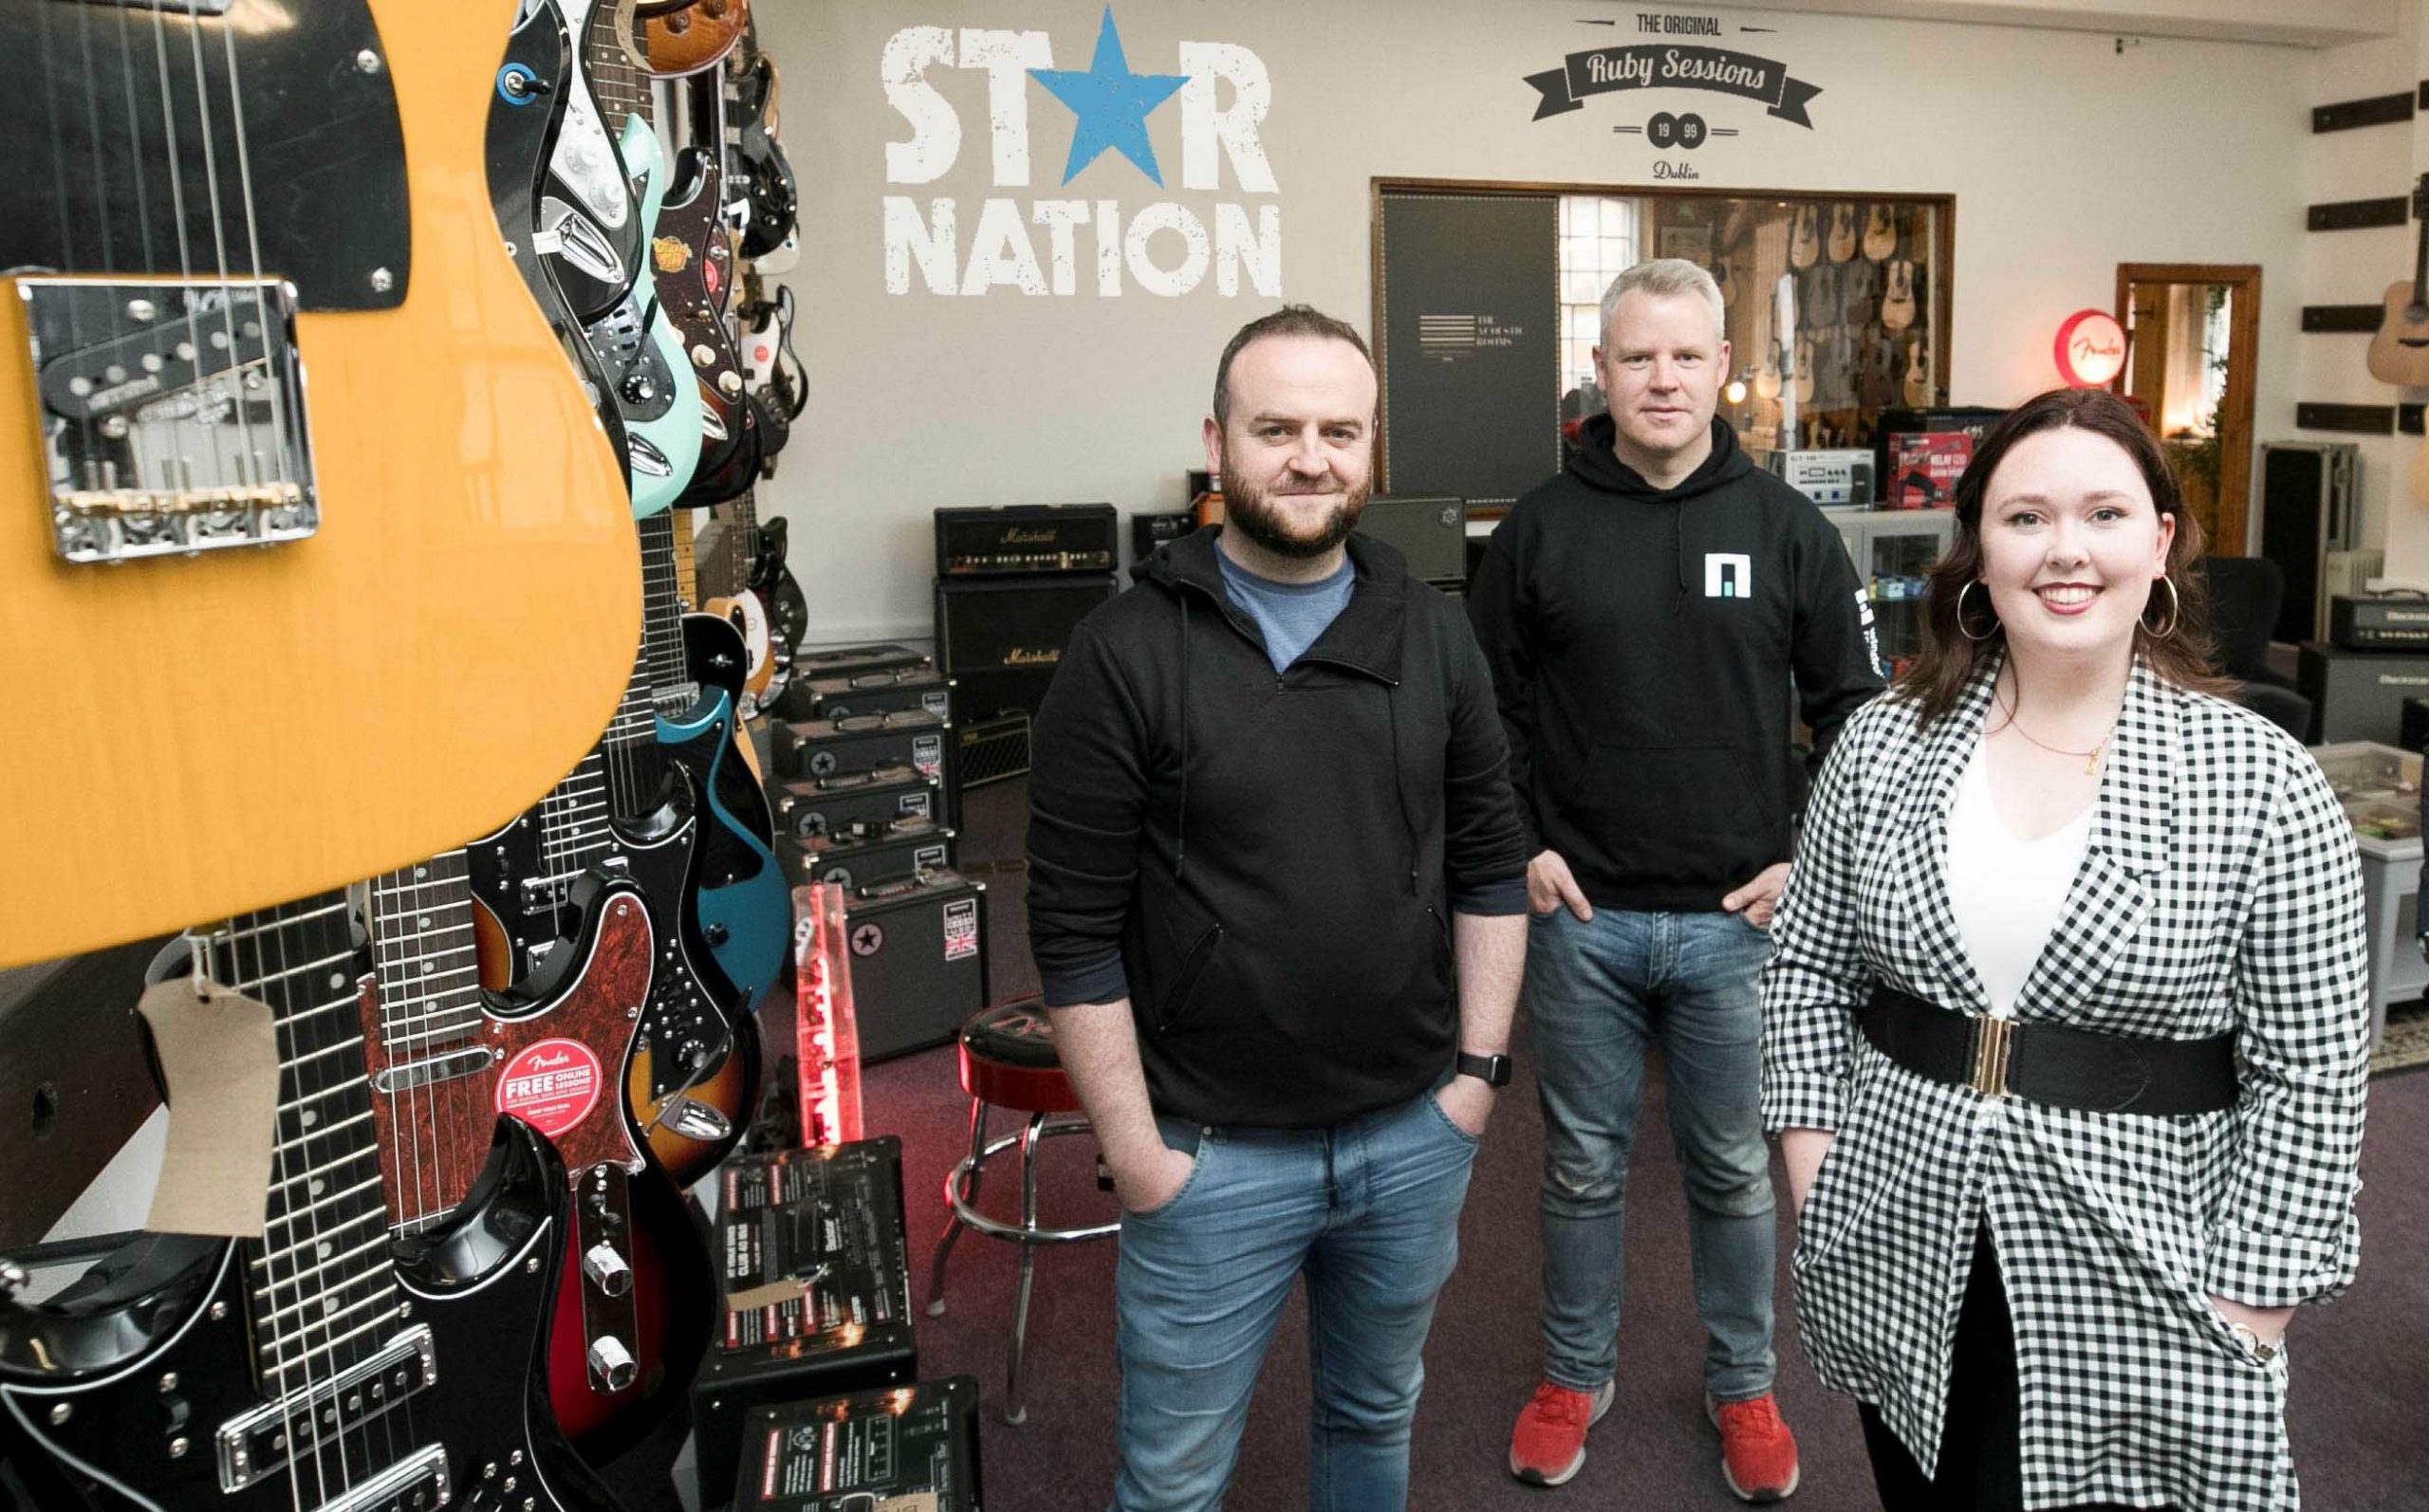 Star Nation 2020 offers musicians a slice of success